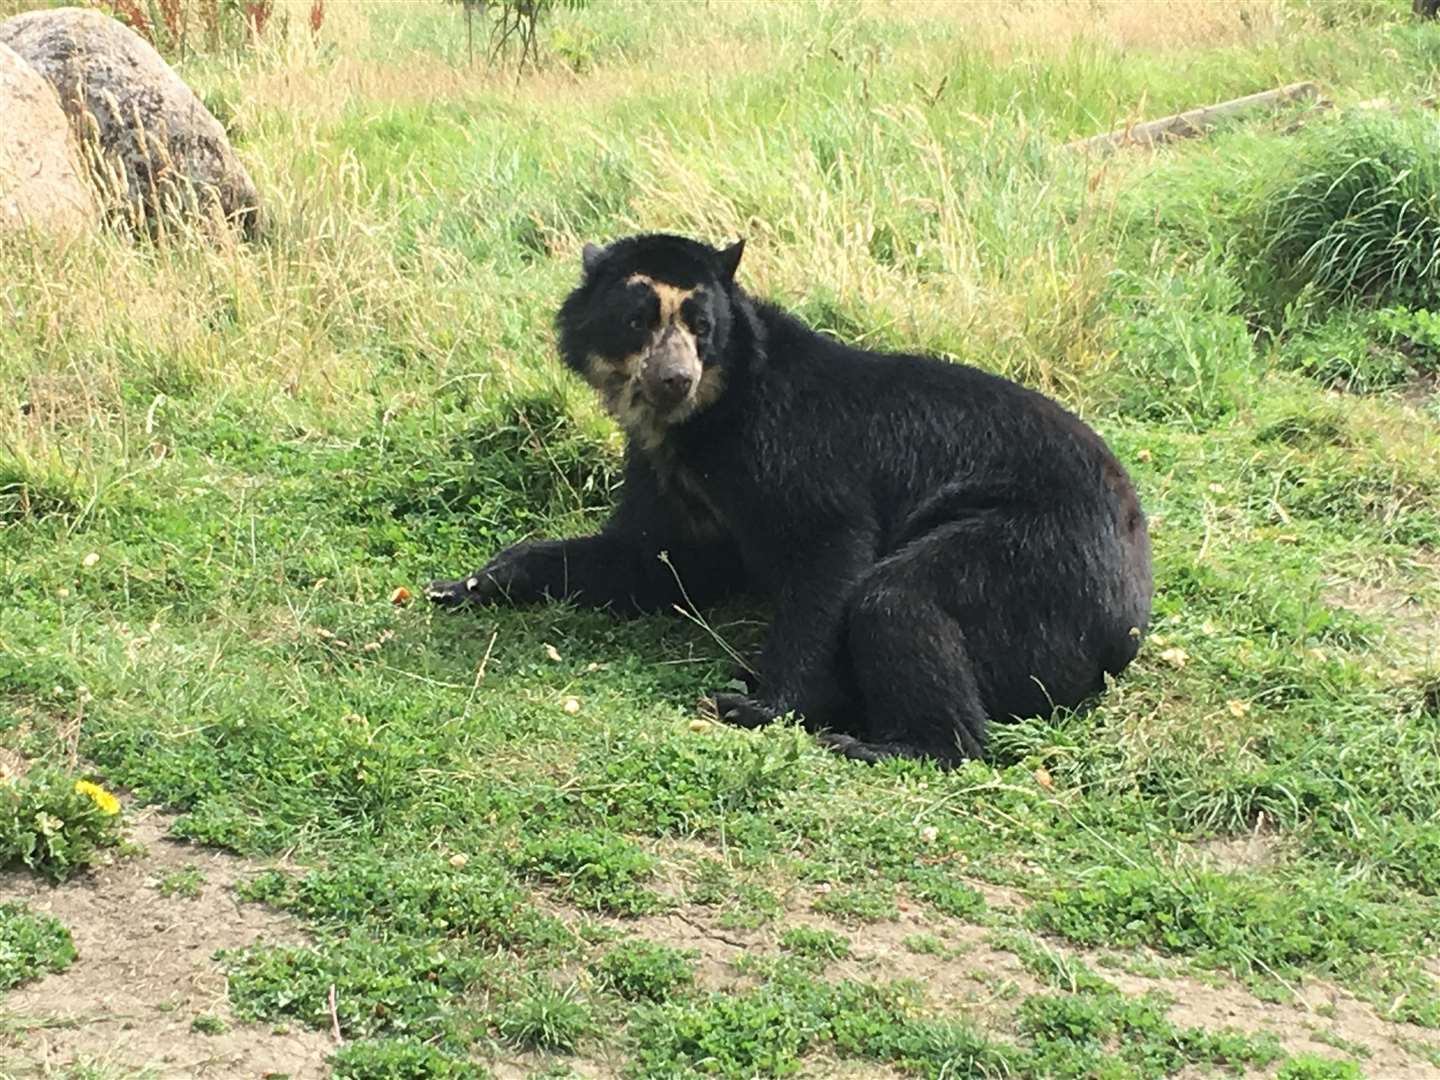 A spectacled bear at Port Lympne was among the five animals to escape their enclosures in as many months, a report has revealed